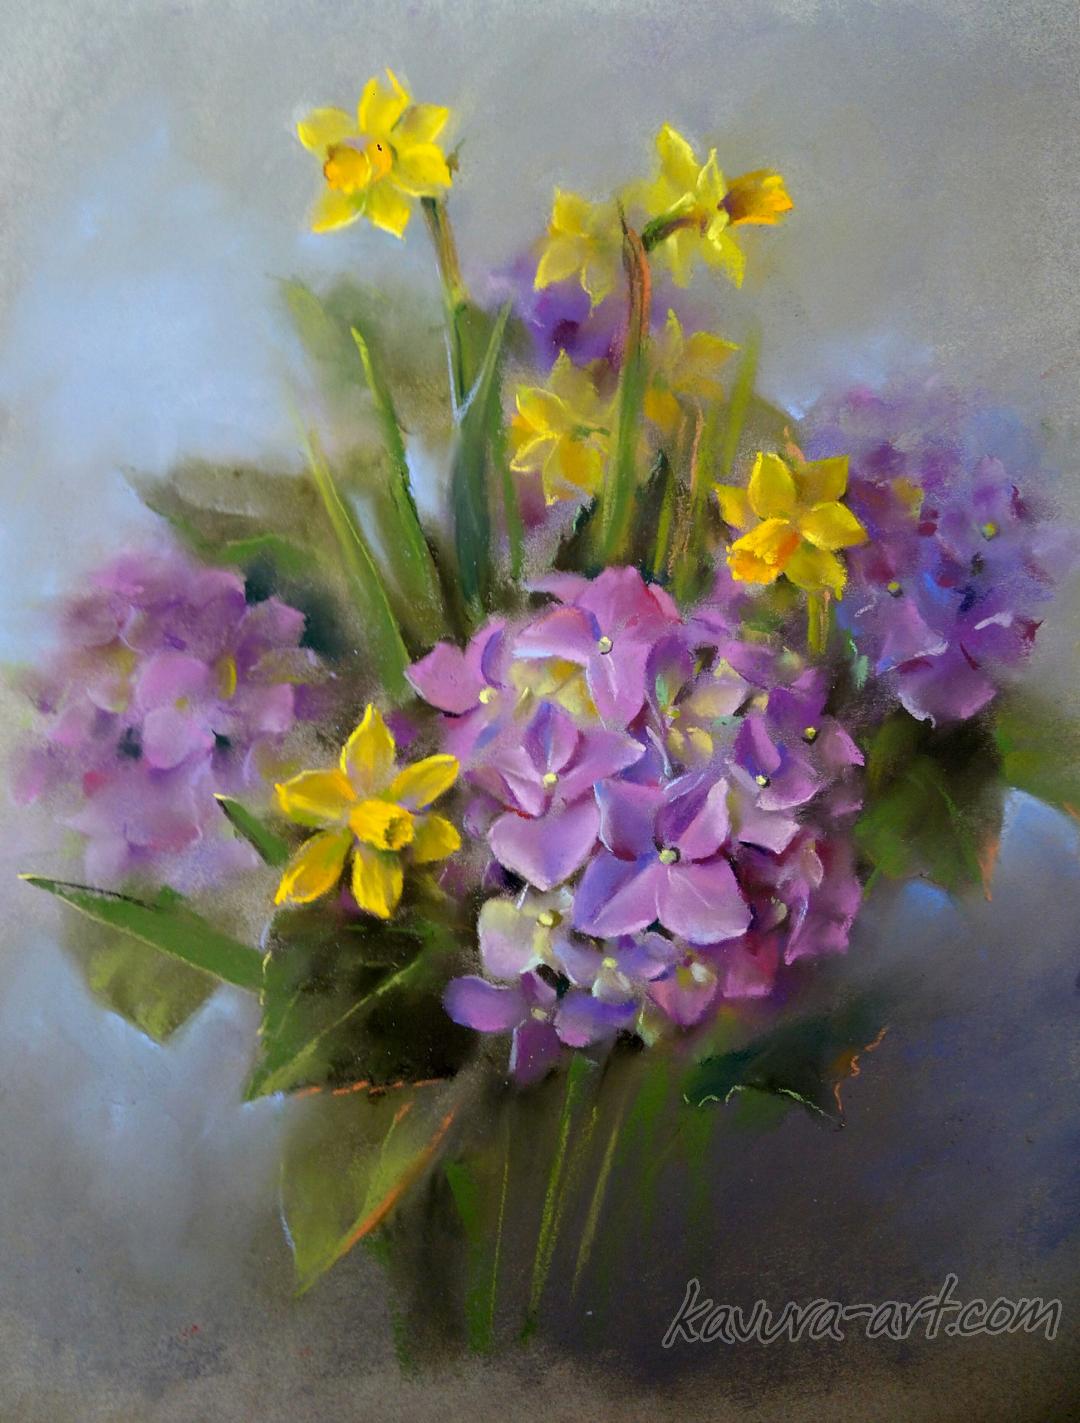 "Spring is comming" Pastel on paper.